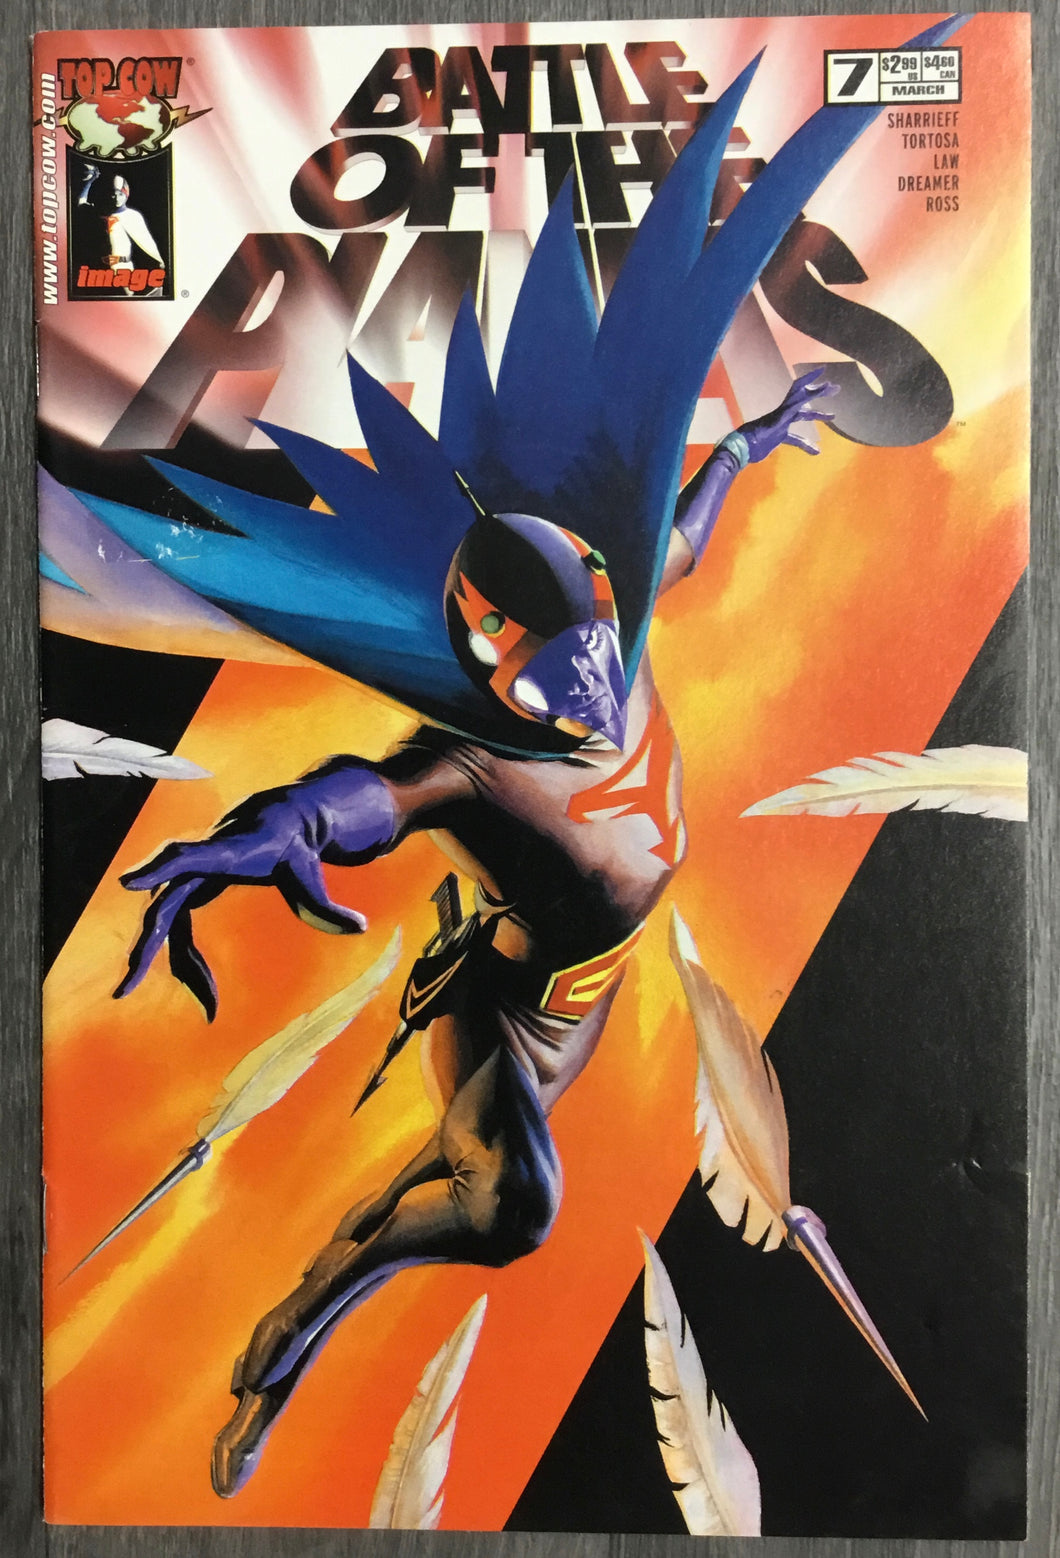 Battle of the Planets No. #7 2003 Top Cow/Image Comics